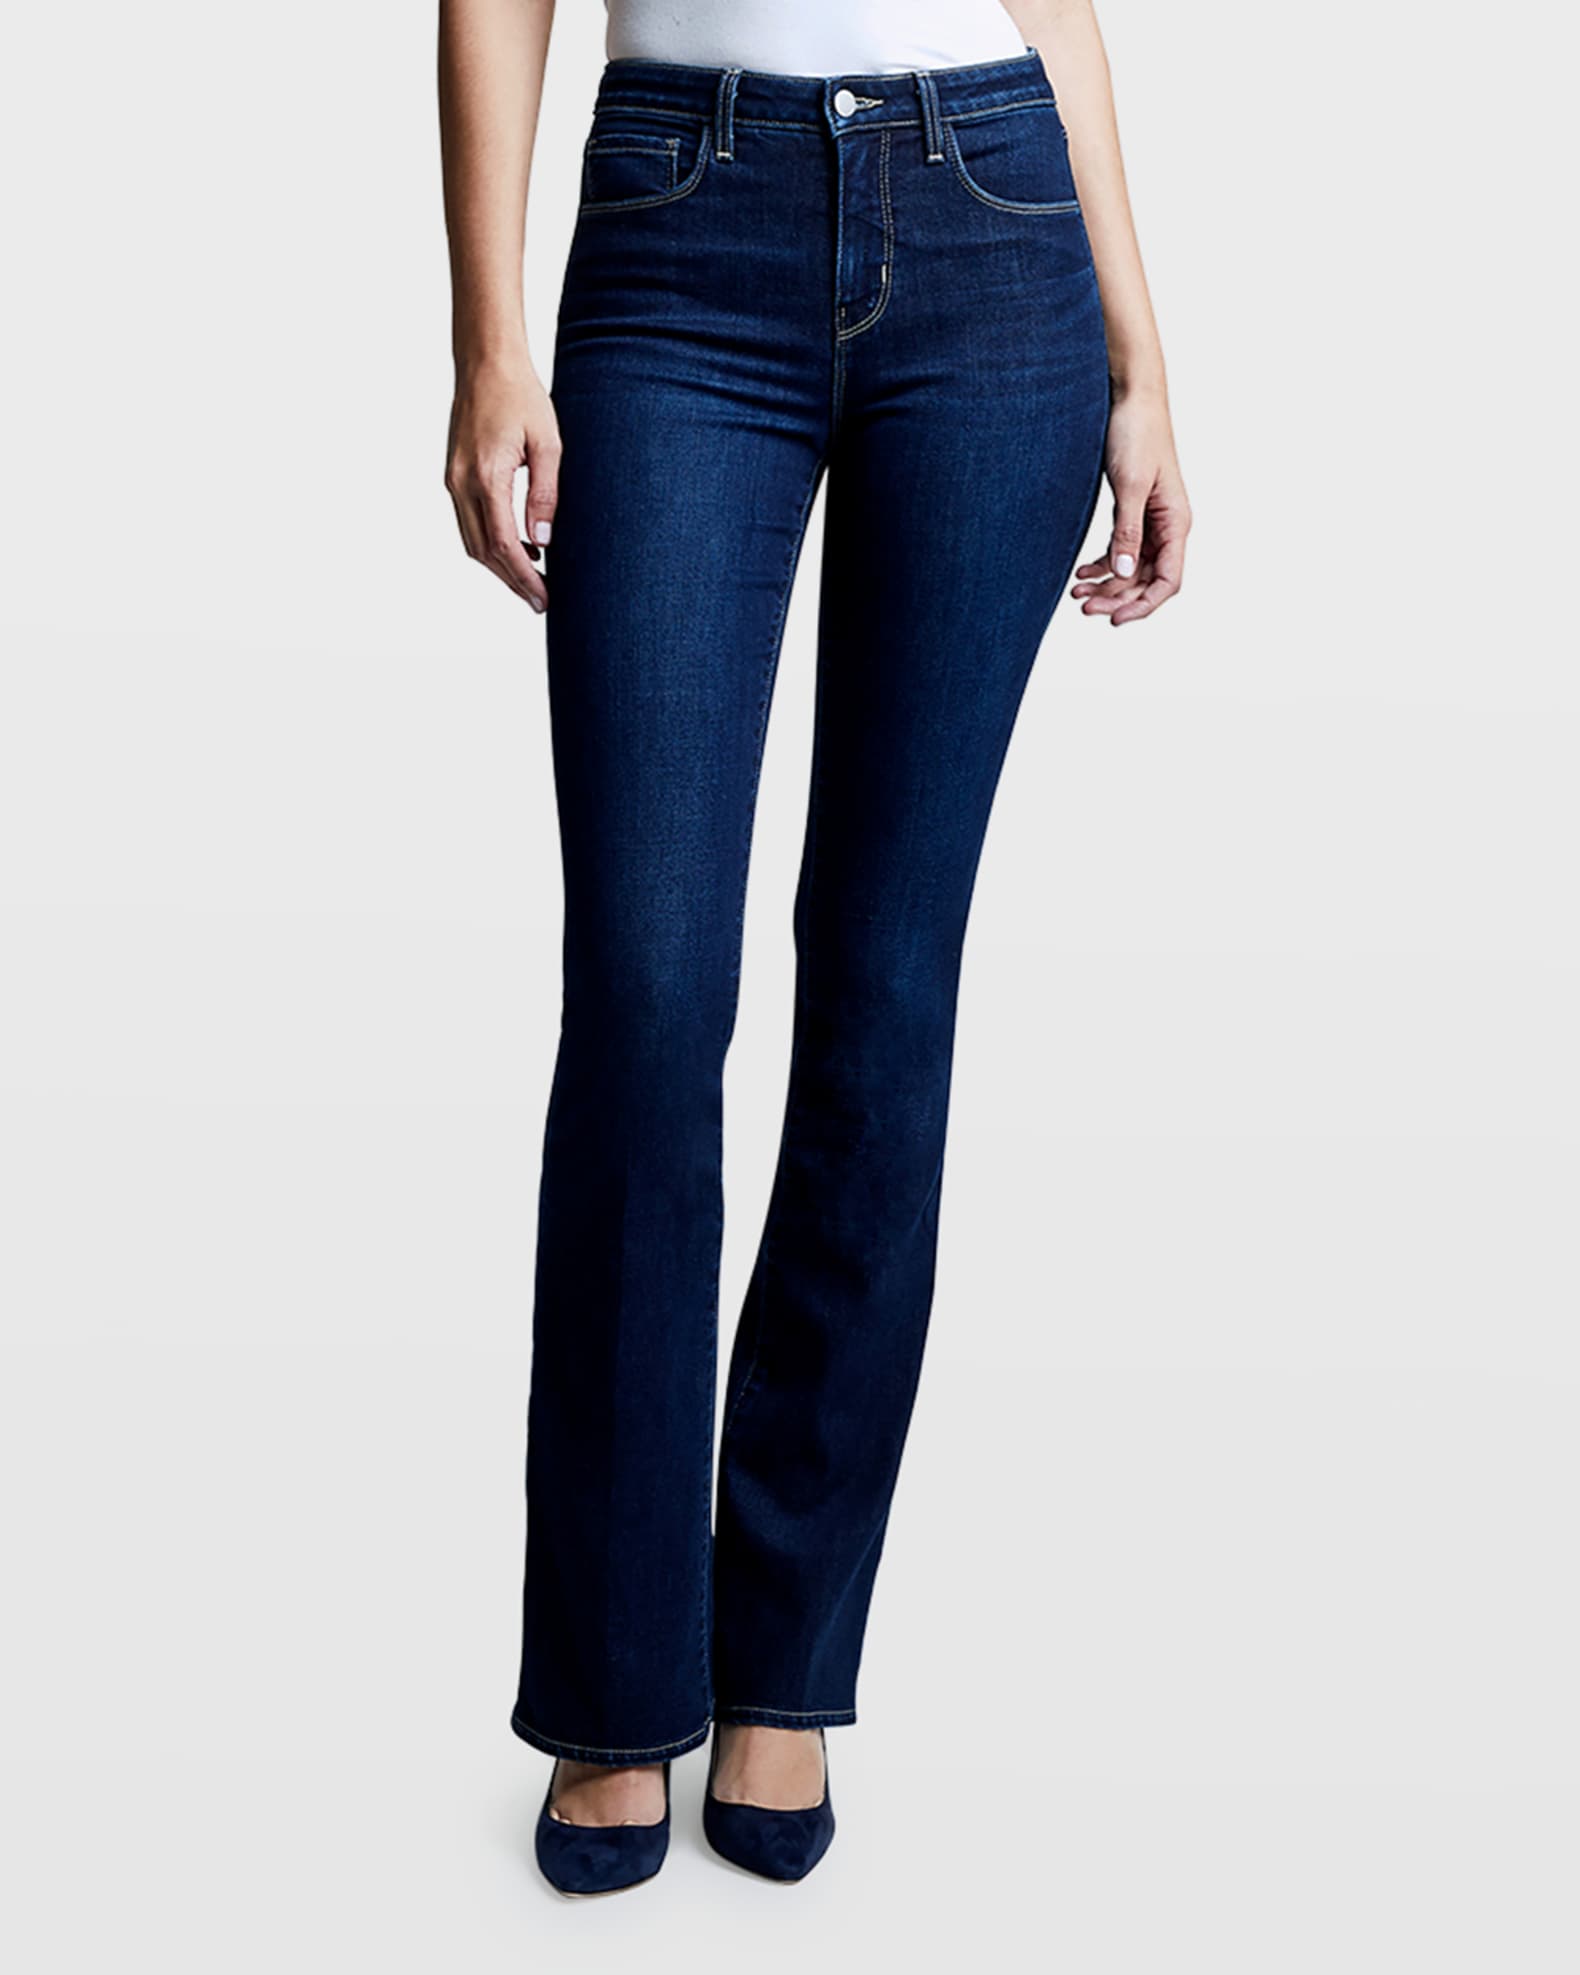 Best jeans for women 2023: the best women's jeans and denim